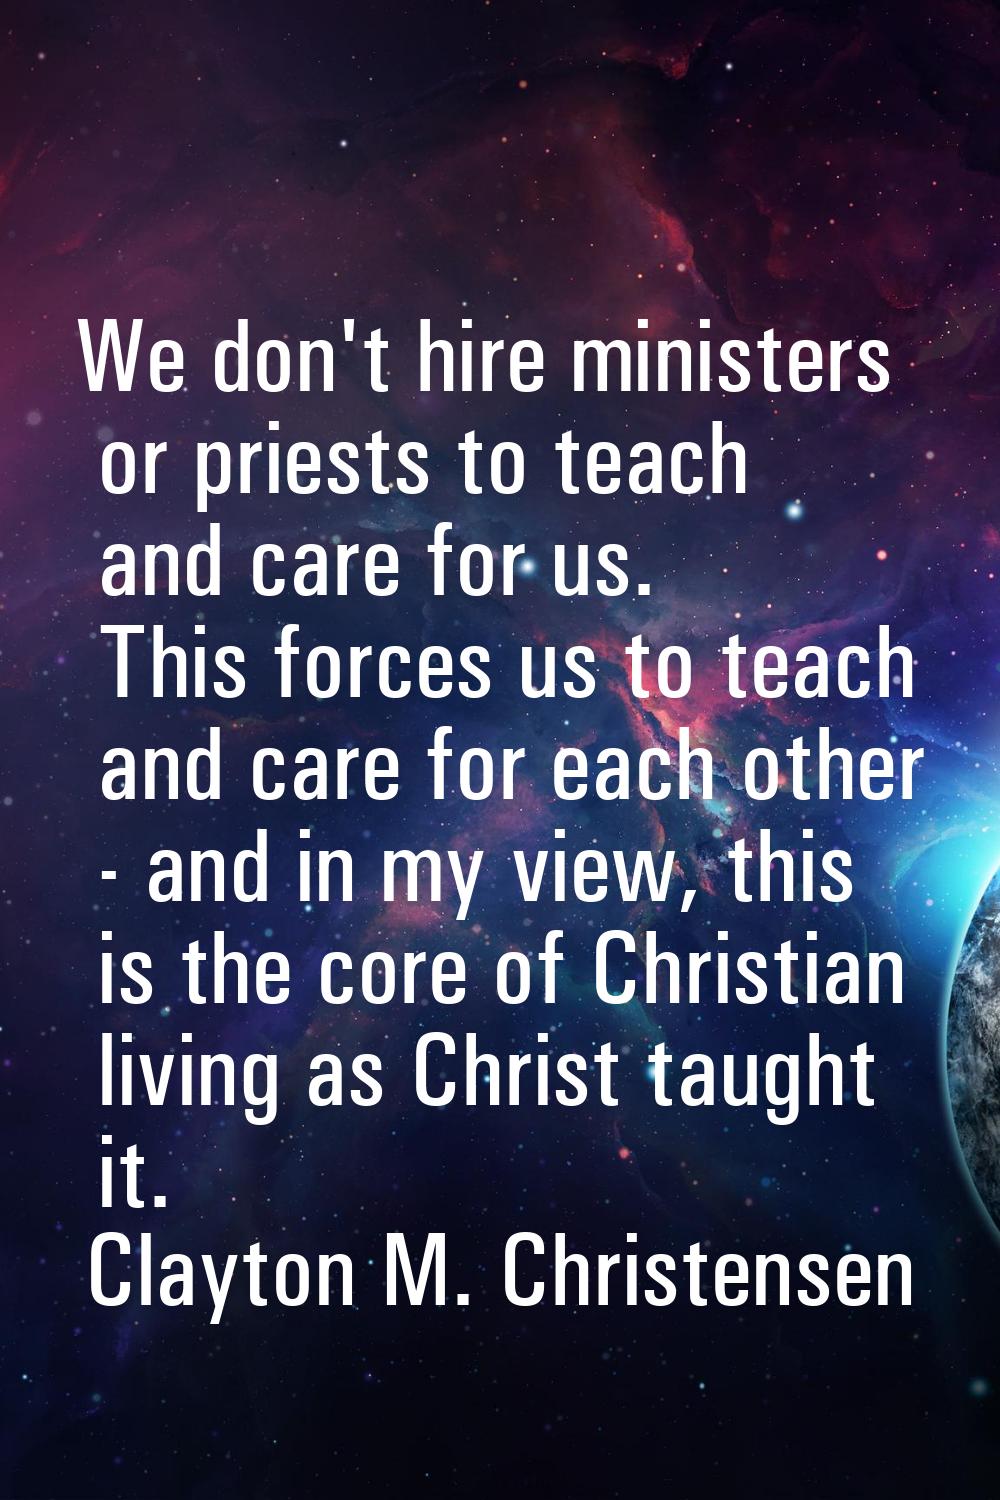 We don't hire ministers or priests to teach and care for us. This forces us to teach and care for e